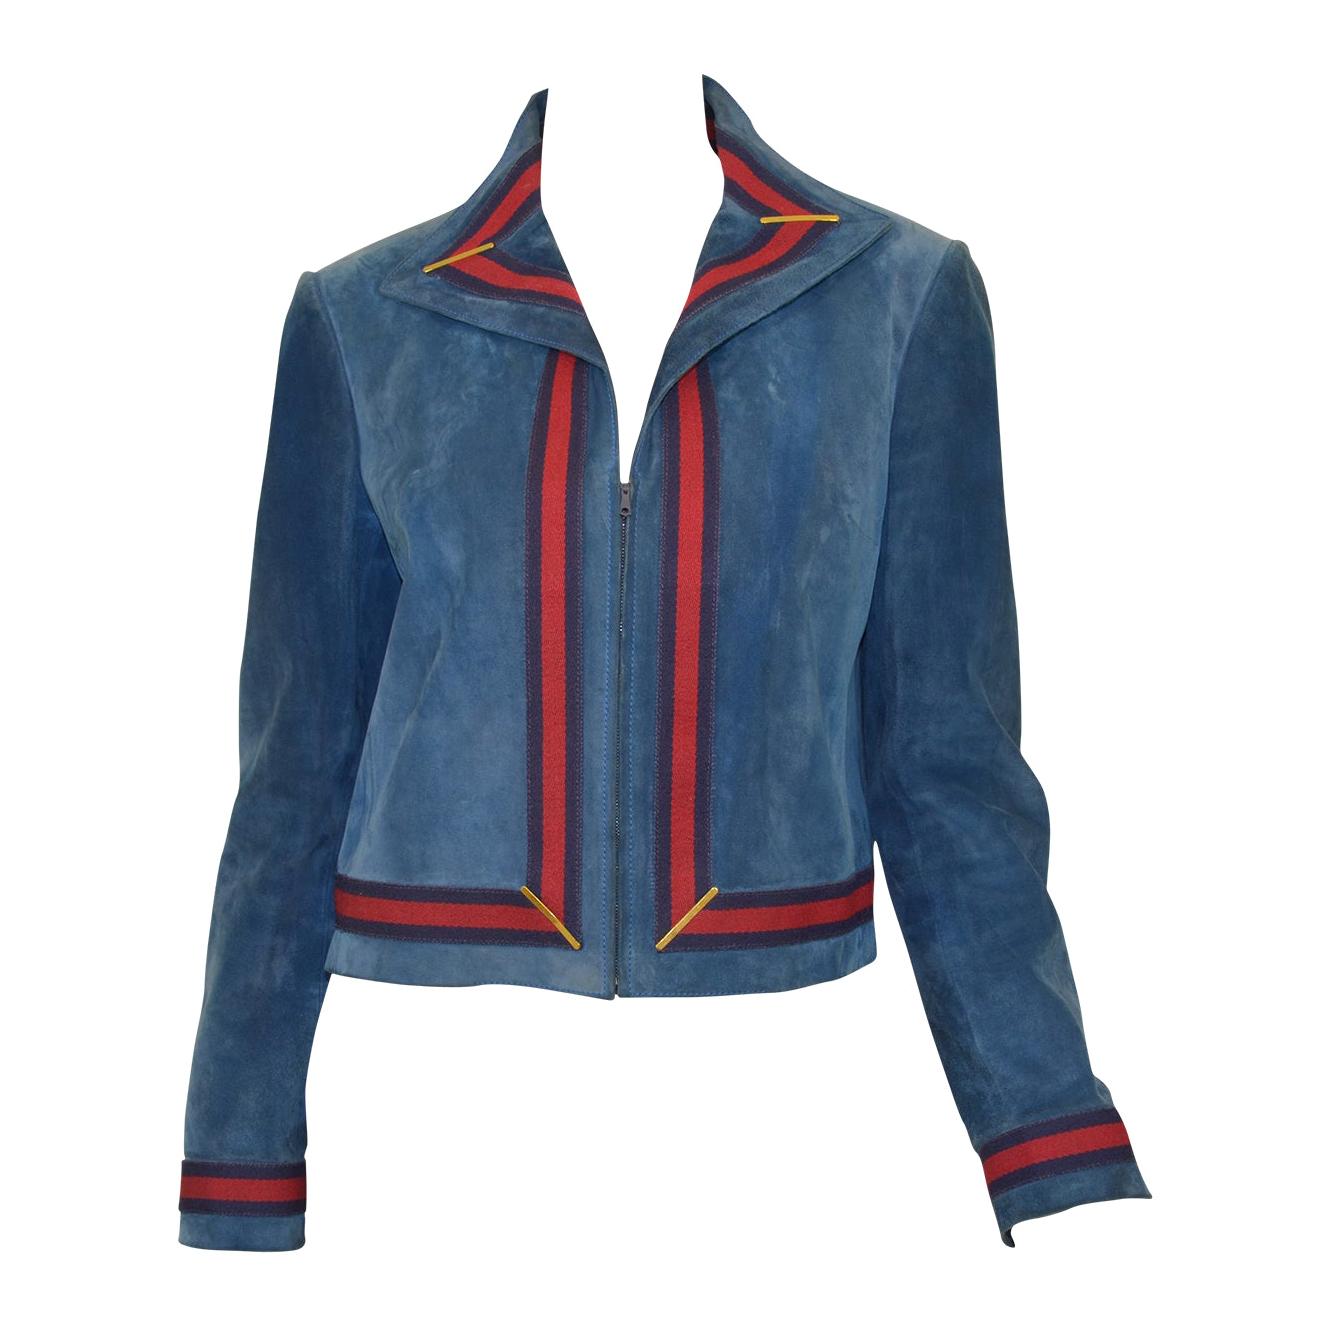 red and blue gucci jacket